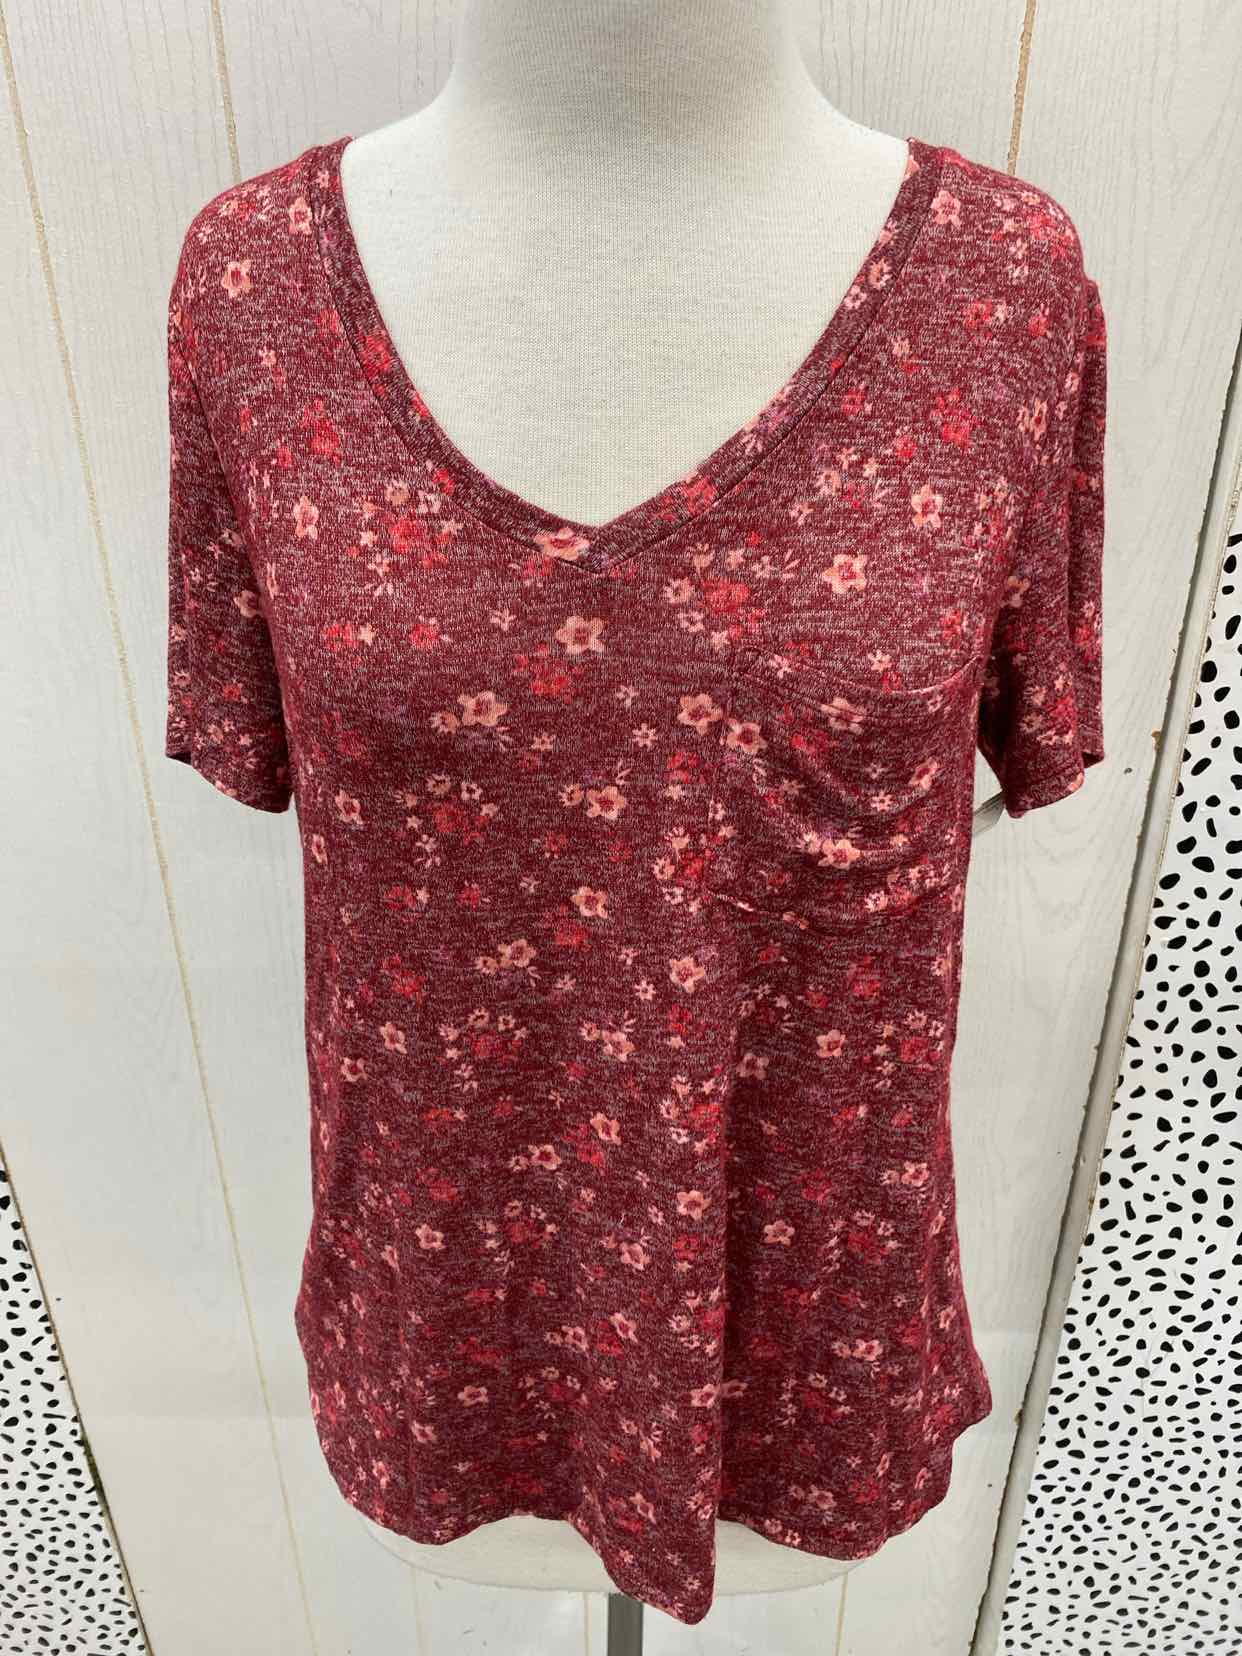 Maurices Burgundy Womens Size M Shirt